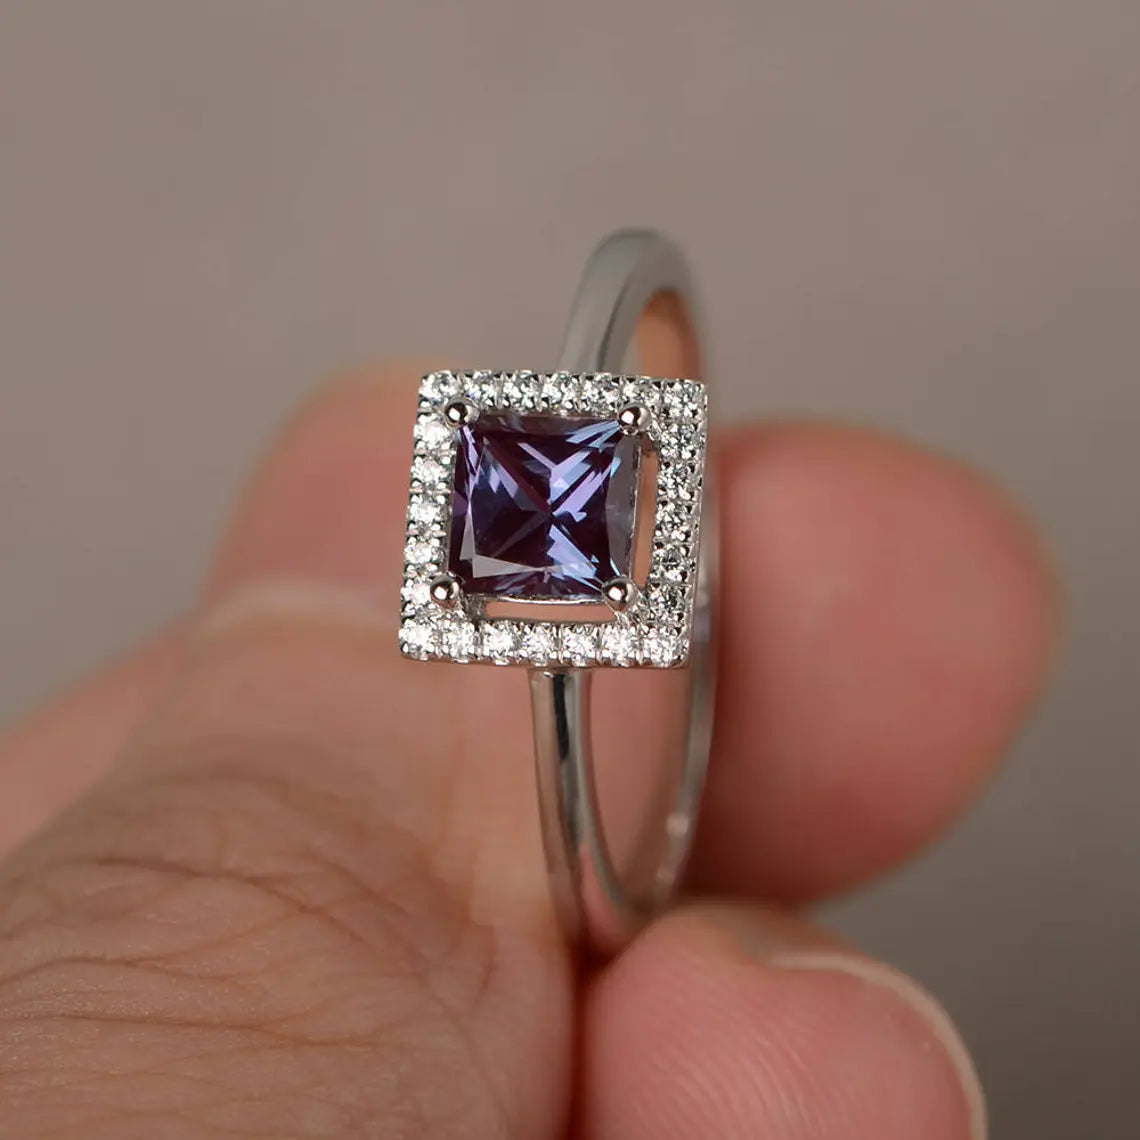 Alexandrite Halo Ring - 925 Solid Sterling Silver Ring